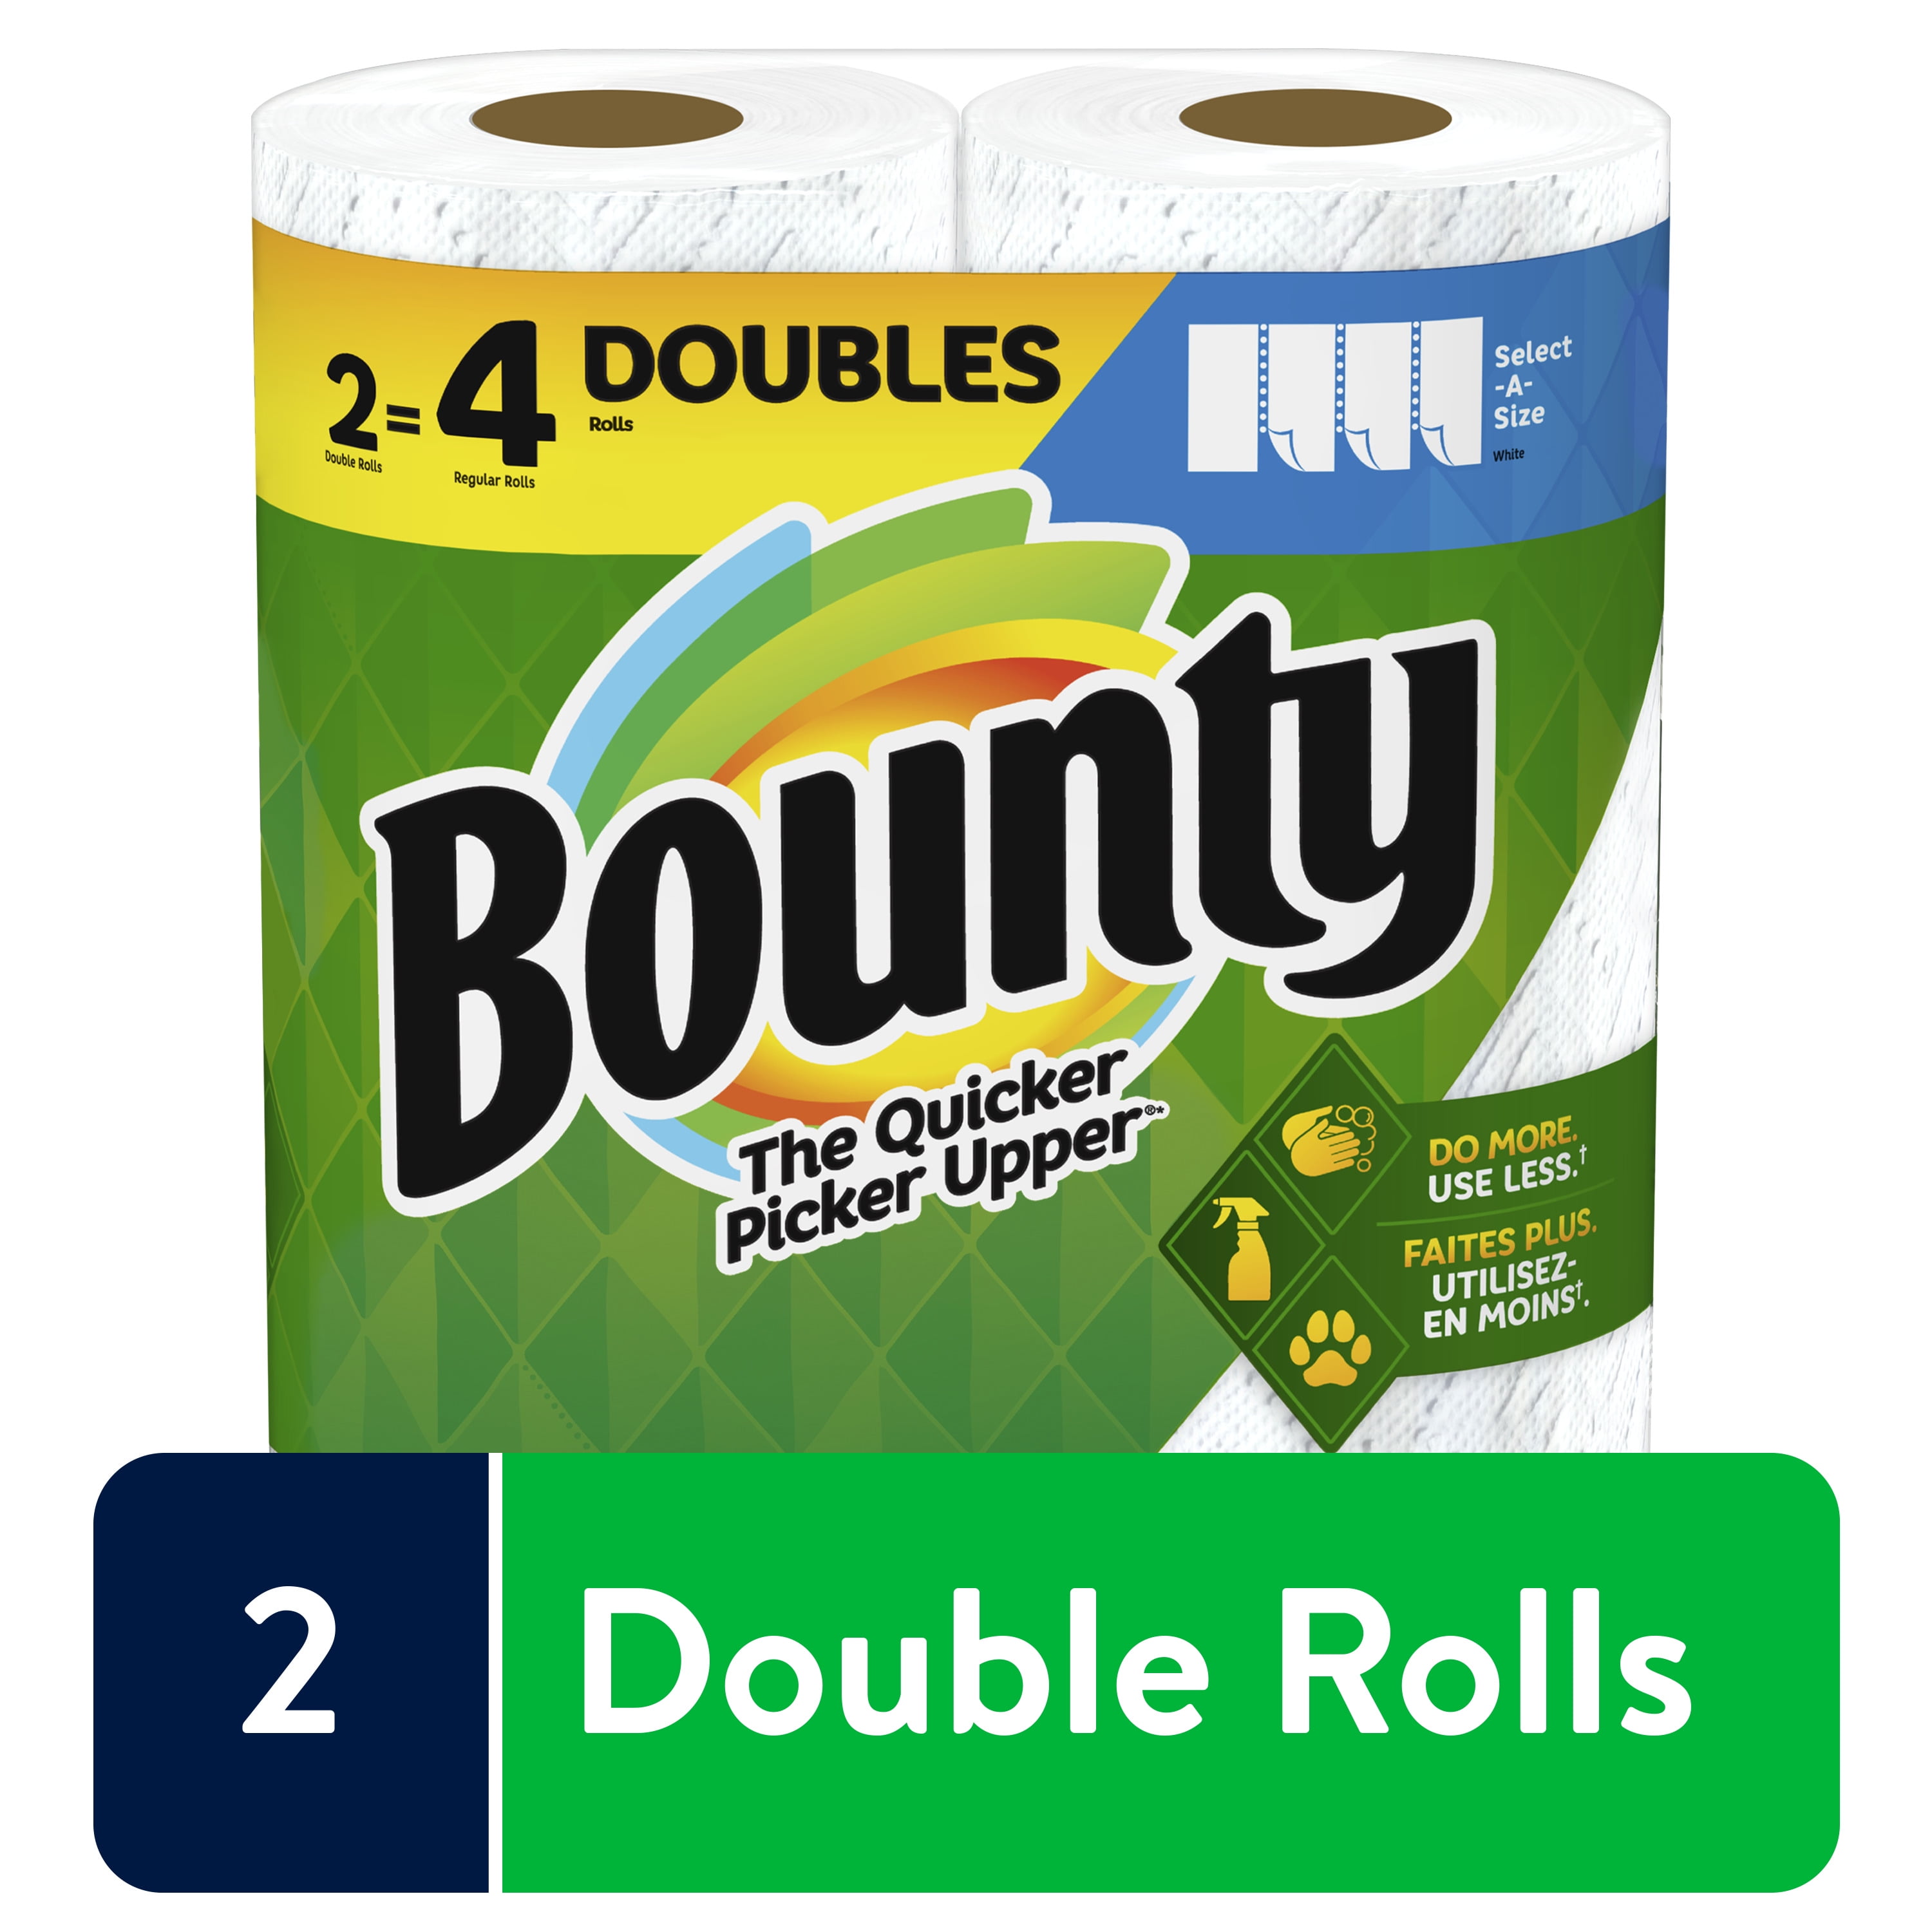 12 Rolls Paper Towels Roll Soft Skin Friendly 5 Ply Household Home Kitchen White 